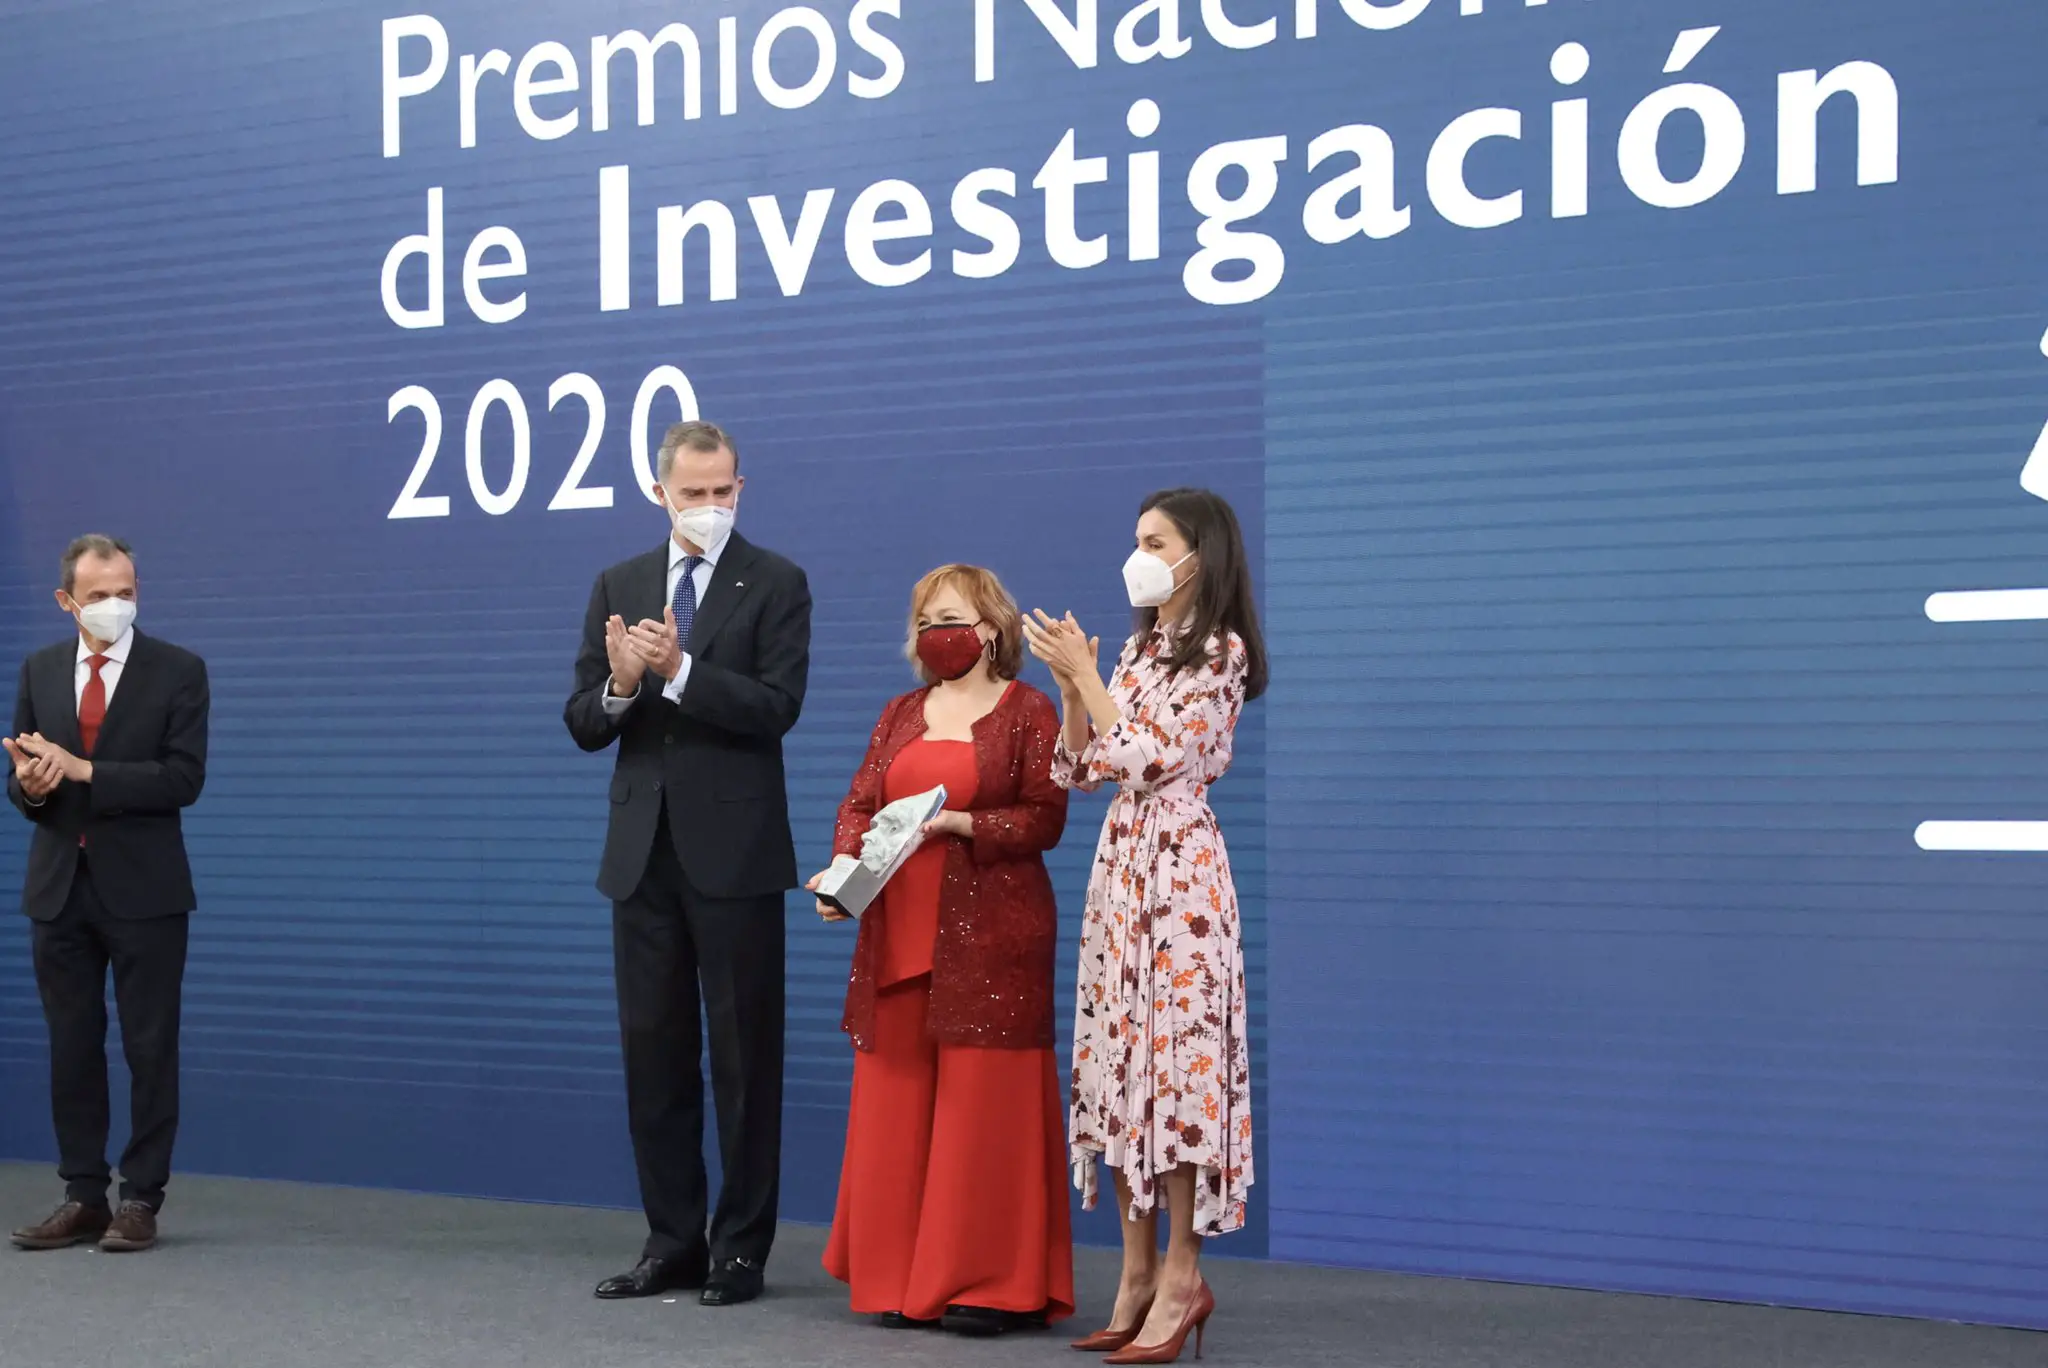 King Felipe and Queen Letizia of Spain presented National Research awards